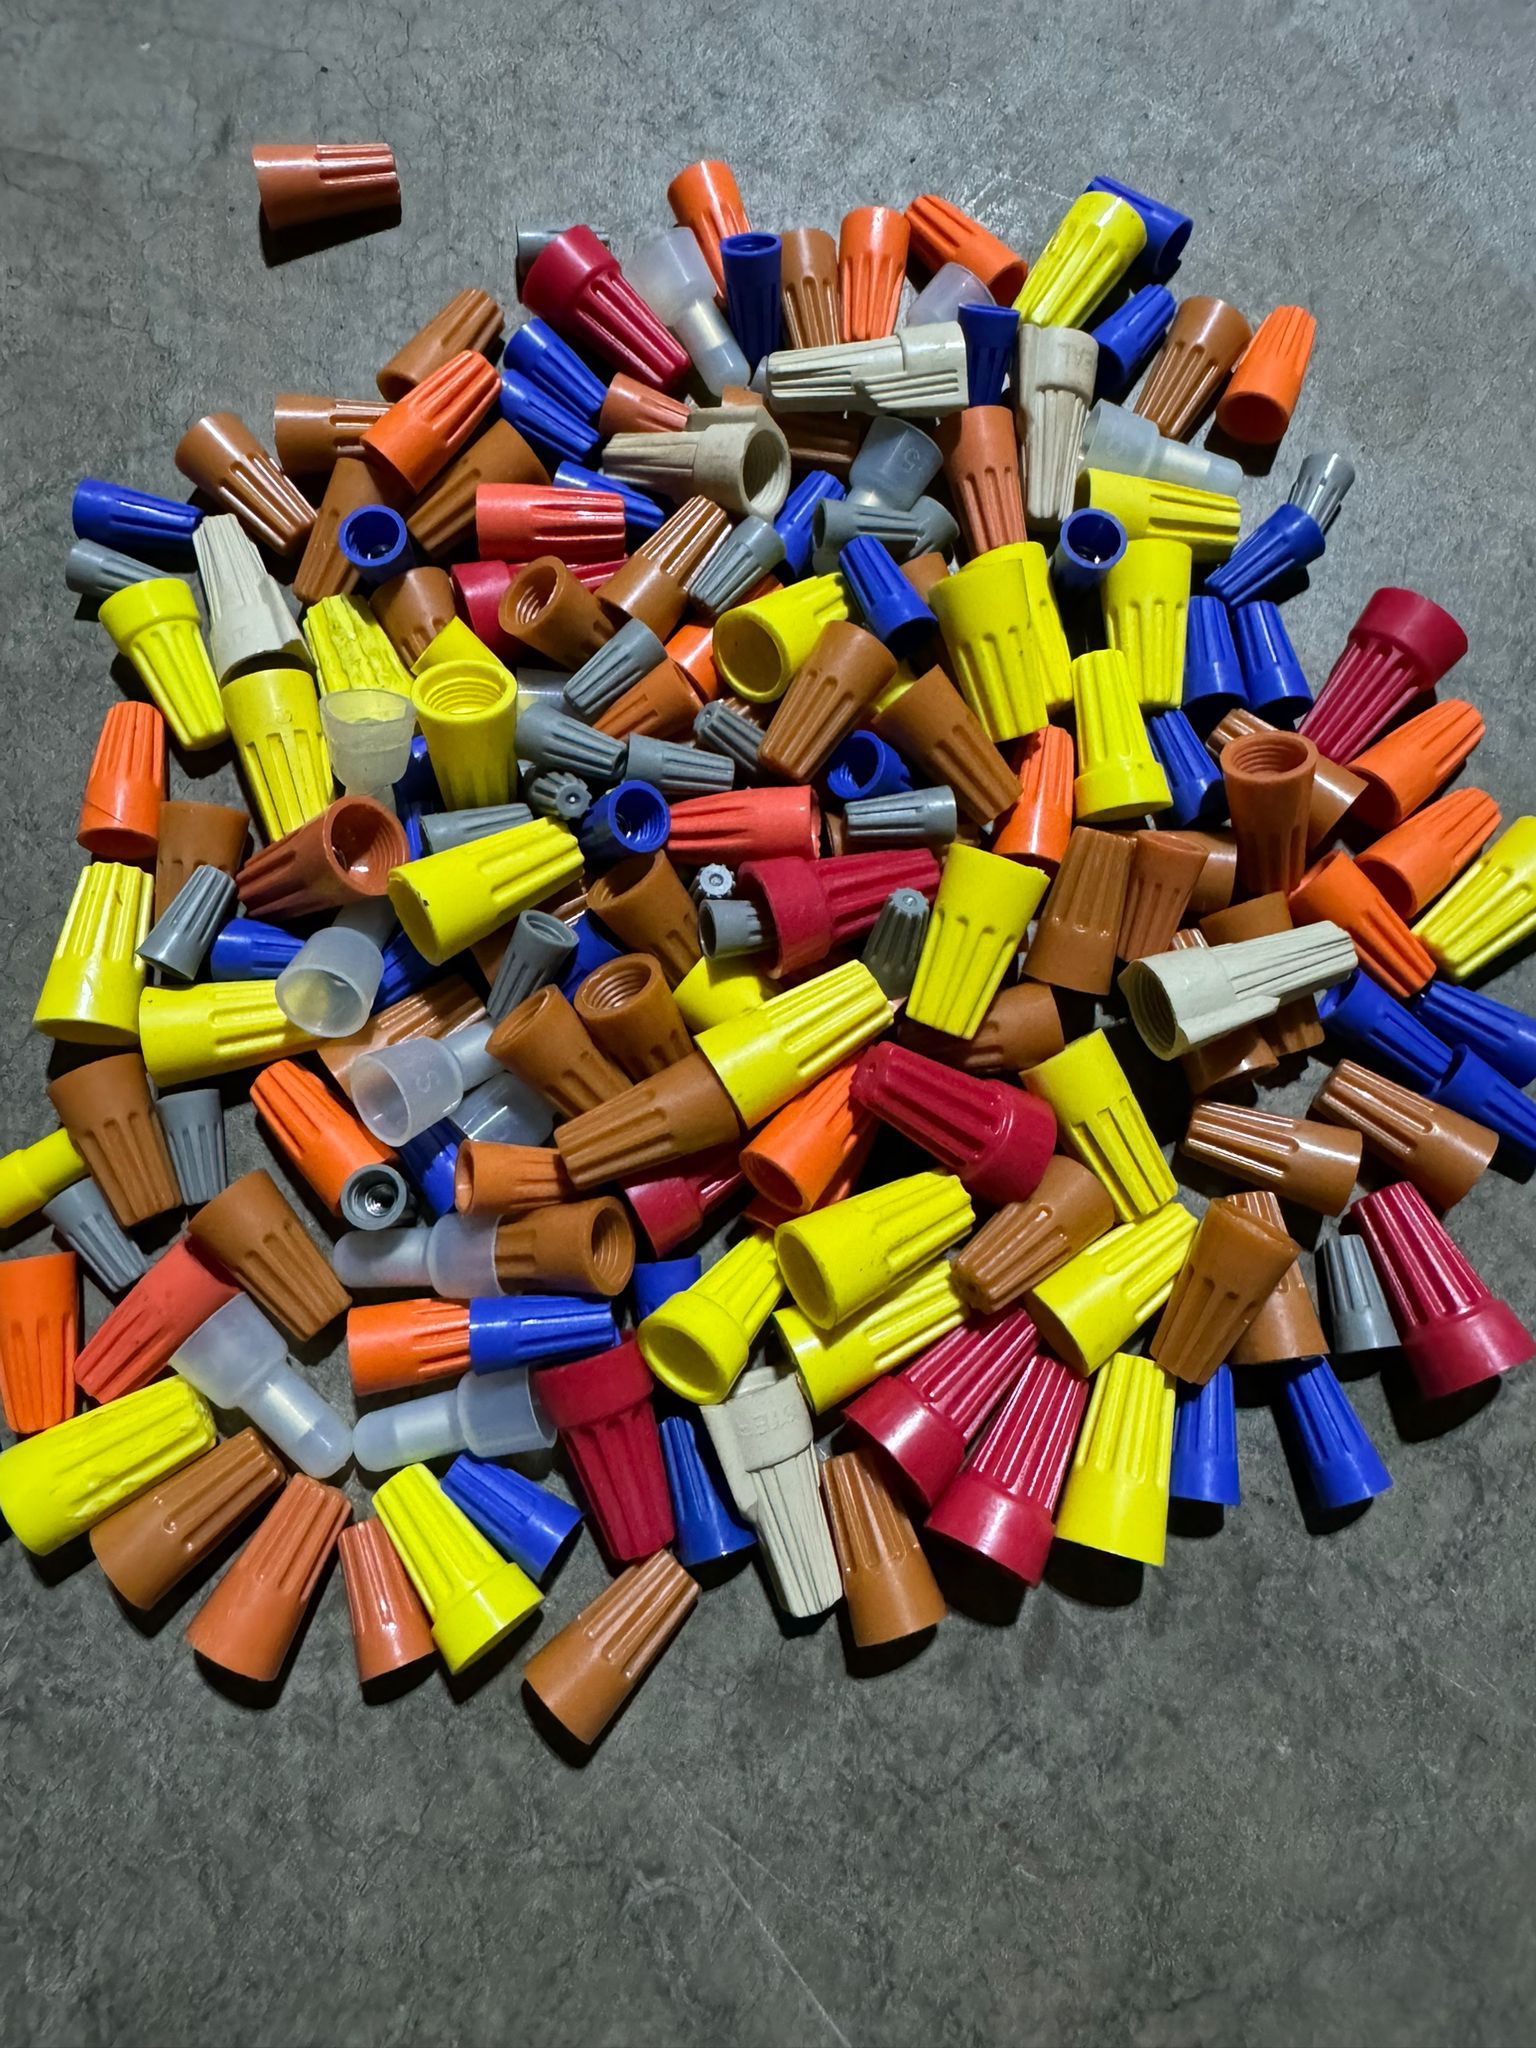 Assorted Colored Wire Caps